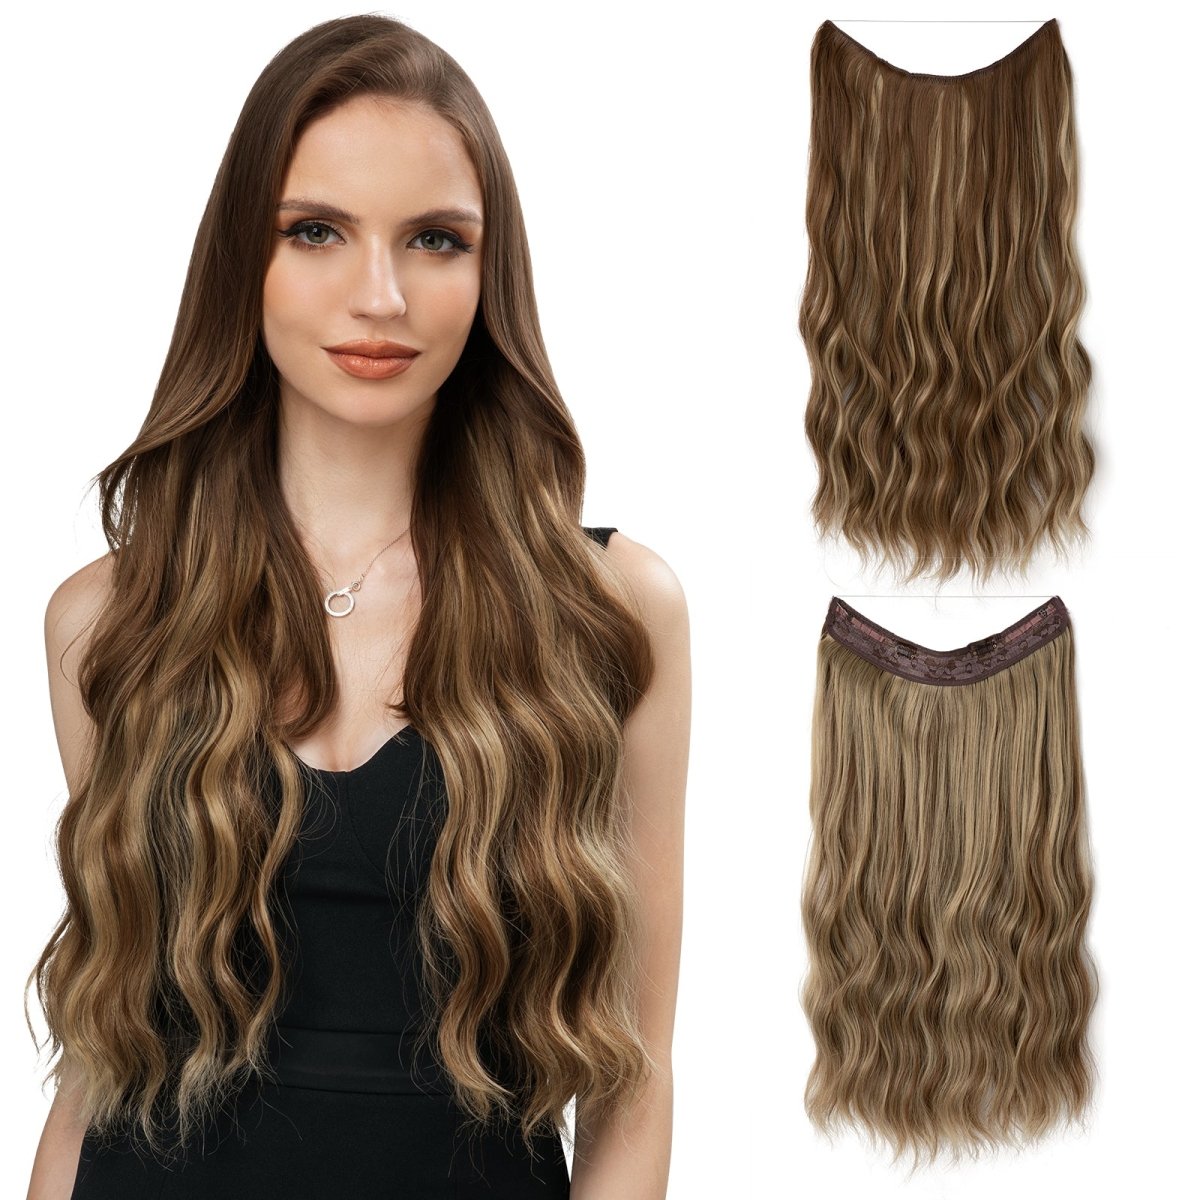 Secret Hair Halo 2.0 Hair Extensions Brown To Ash Blonde - BEAUTY BELLO®